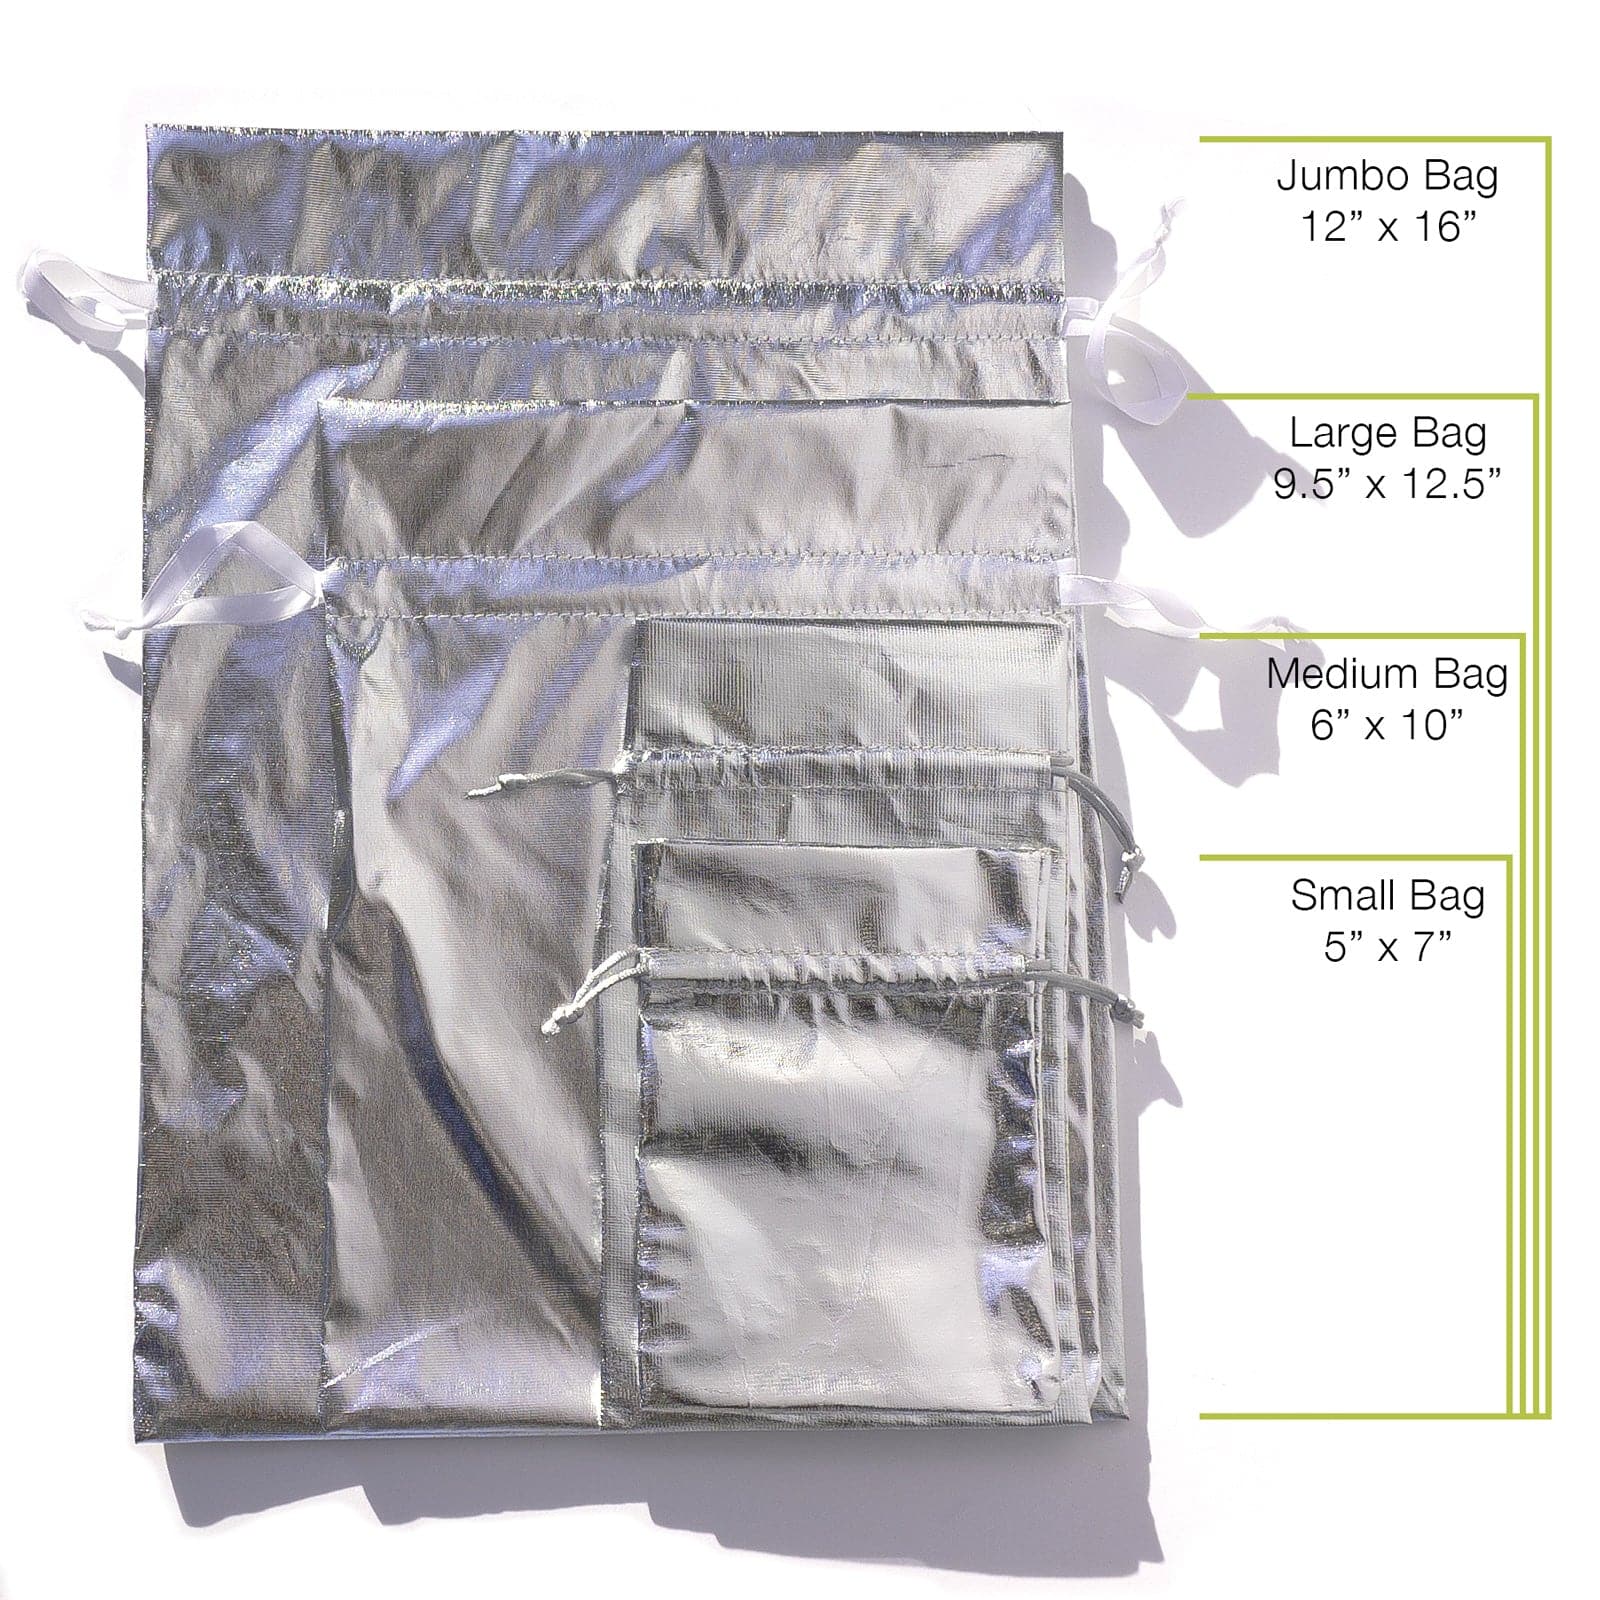 an image of 4 metallic silver drawstring gift bags on a white background, laying flat. Text on it corresponds to the sizes. Small bag - 5" x 7". Medium bag 6" x 10". Large bag 9.5" x 12.5". Jumbo Bag 12" x 16".